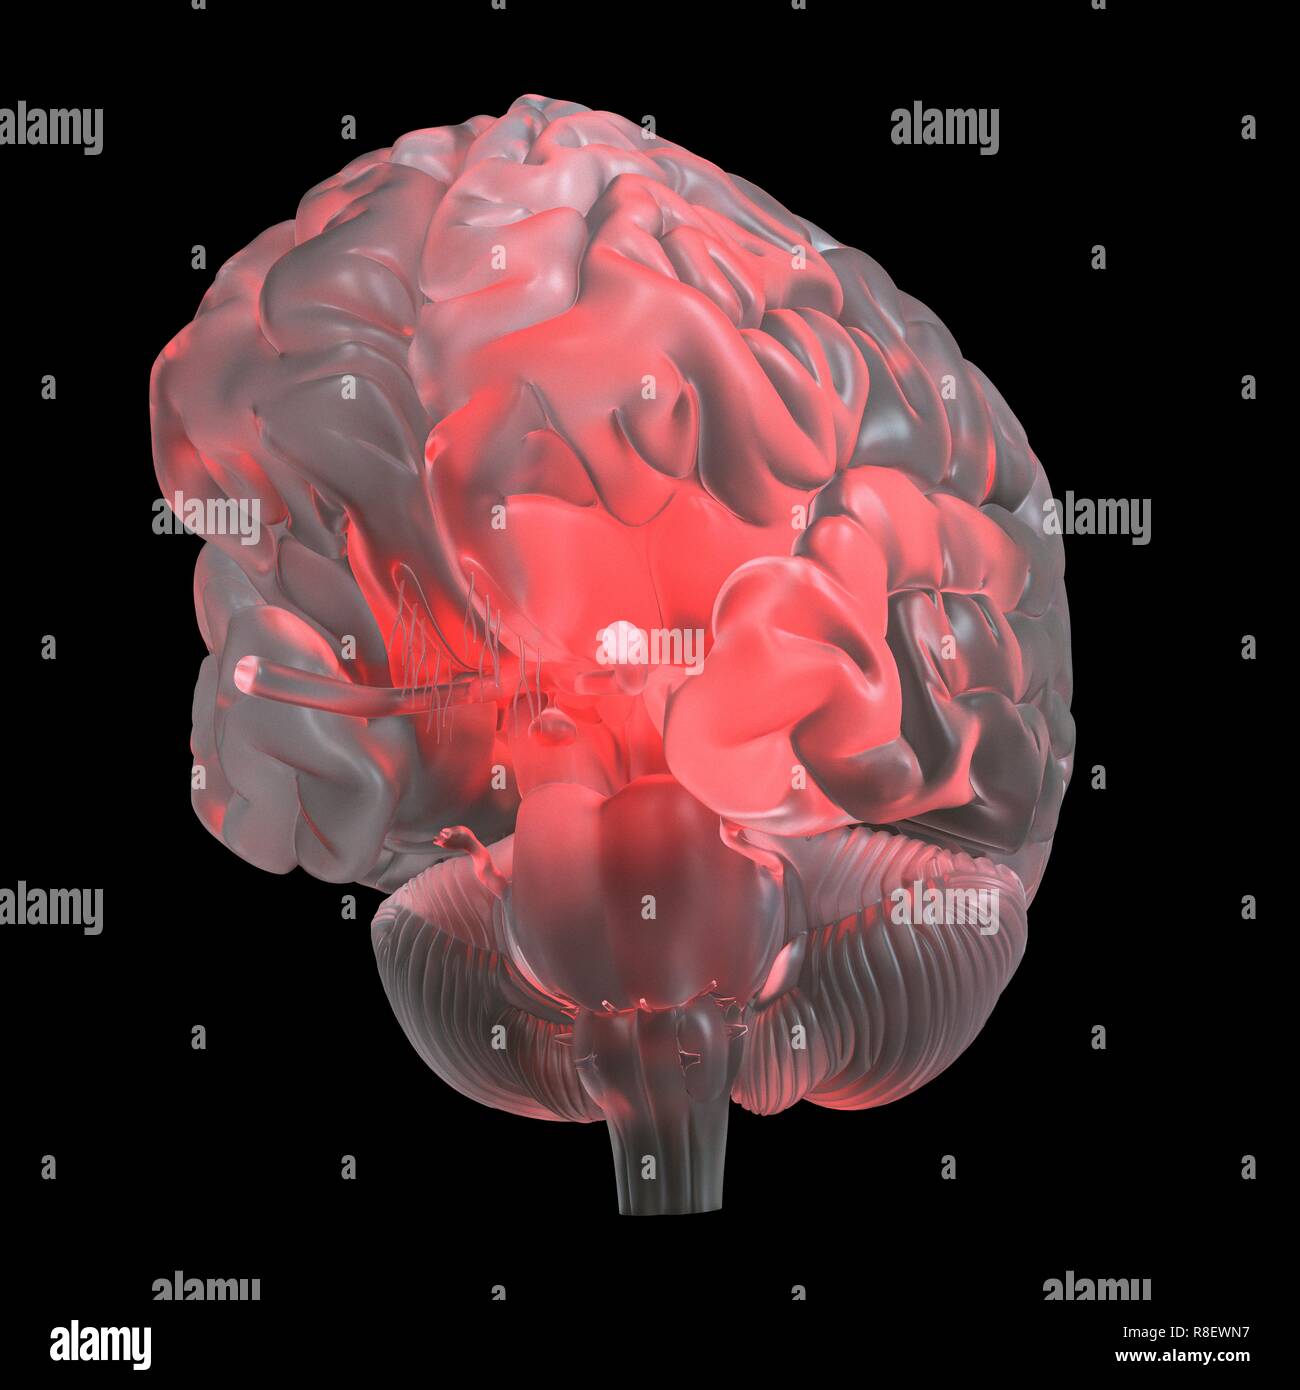 Illustration of a red glowing glass brain. Stock Photo